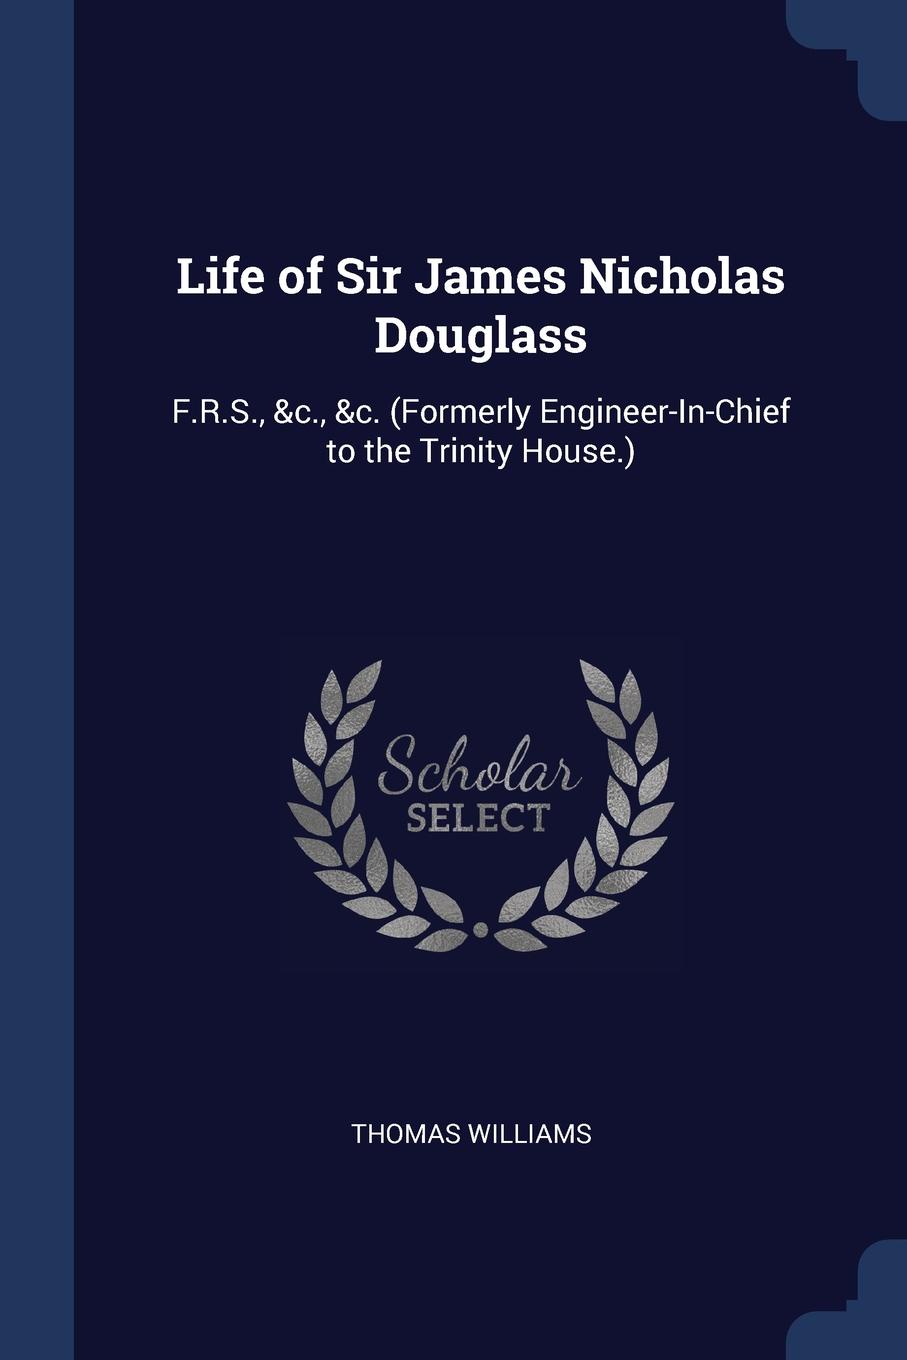 Life of Sir James Nicholas Douglass. F.R.S., .c., .c. (Formerly Engineer-In-Chief to the Trinity House.)